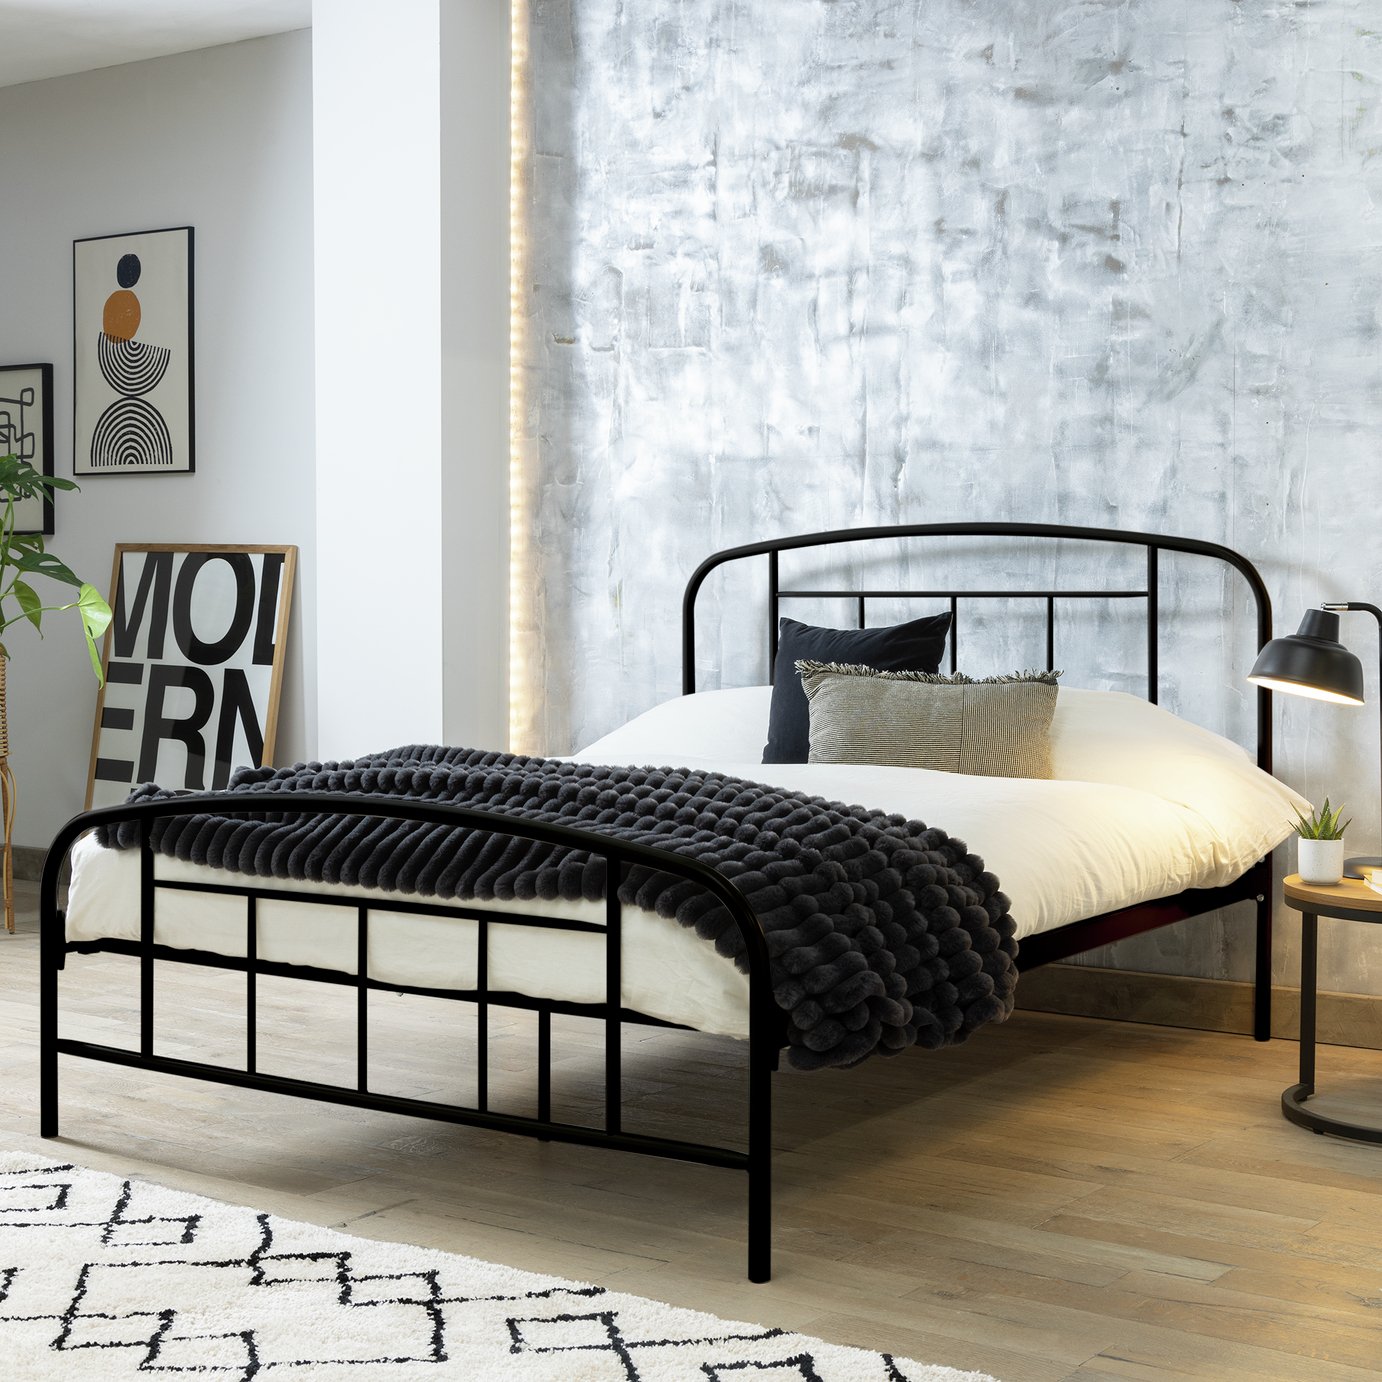 Habitat Pippa Small Double Metal Bed Frame - Black